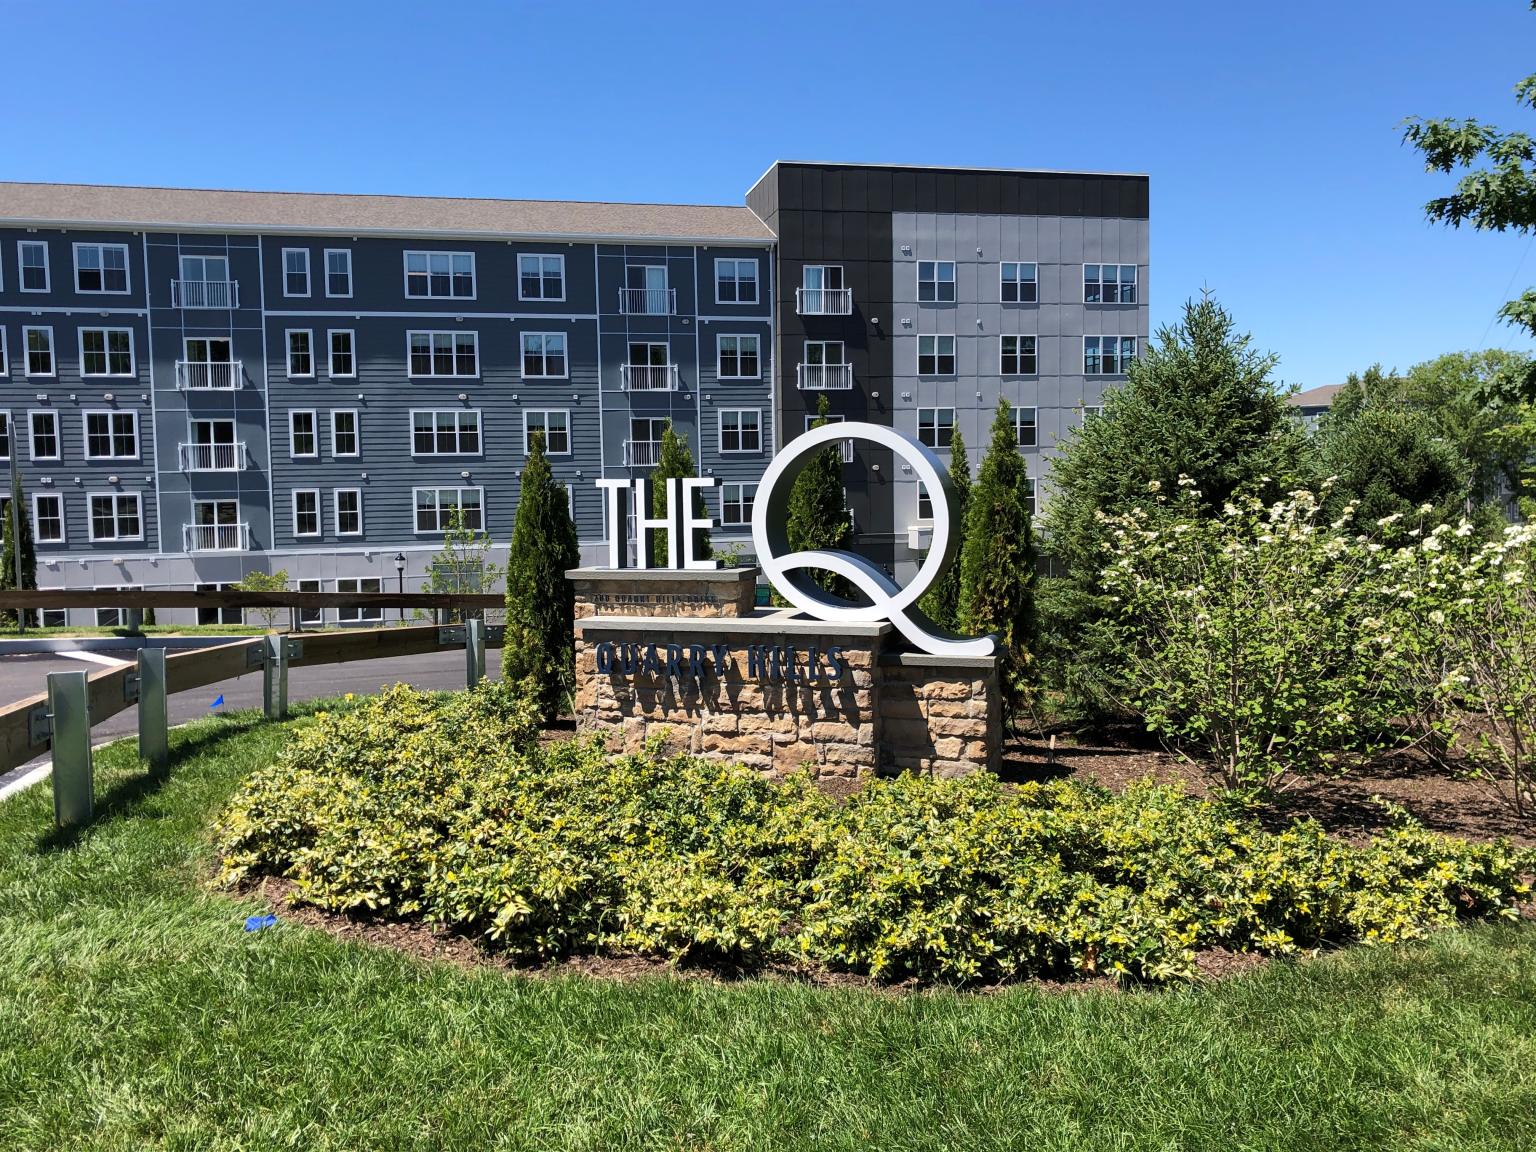 The Q Apartments, managed by Dolben, in Quincy, Massachusetts